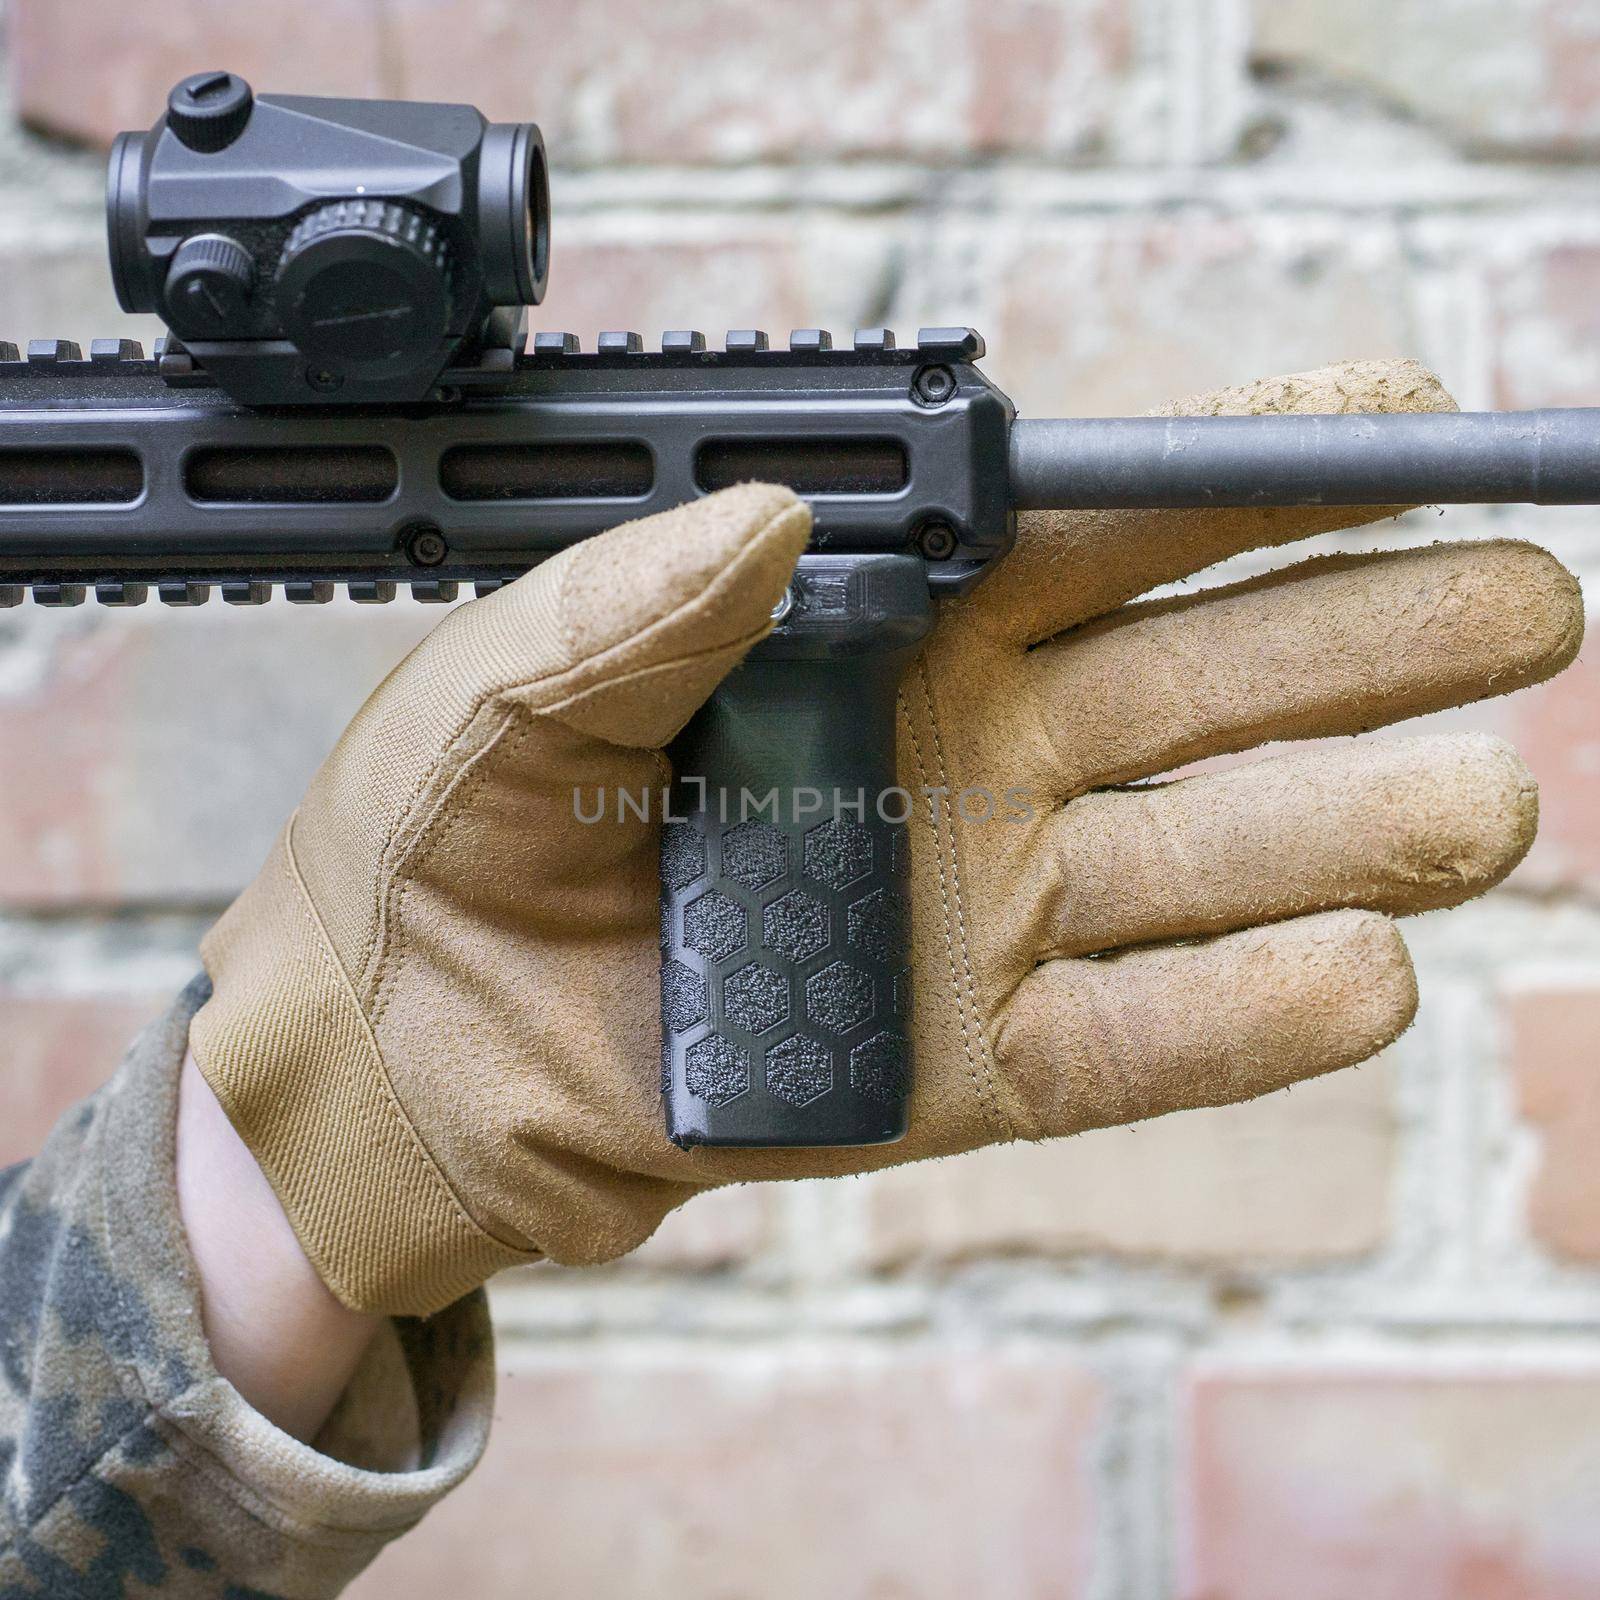 man hand in tactical glove hold front grip for a shot gun. Handgun im man hand ready to use. Shooter man ready to hit the target holding a hand grip.